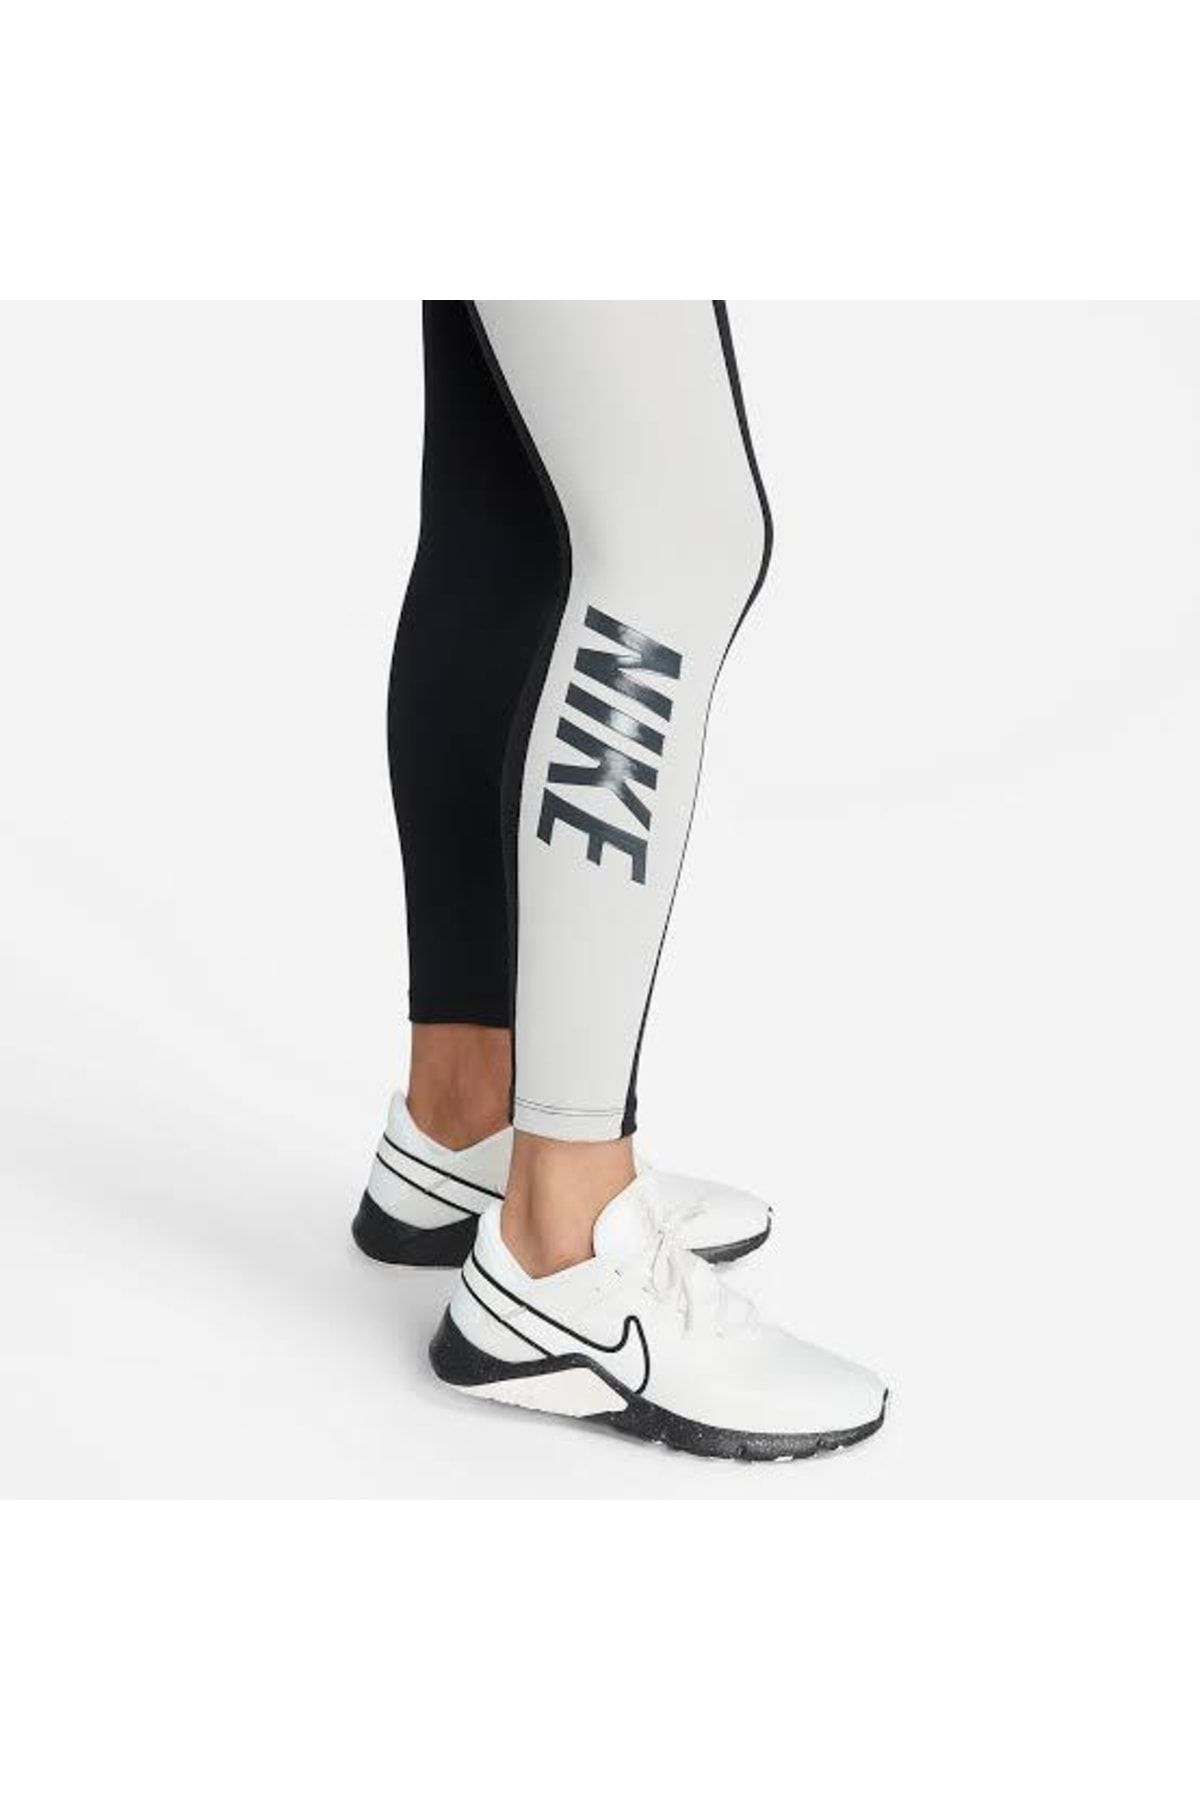 Nike Normal Waisted 7/8 Color Block Women's Training Tights Dq5550